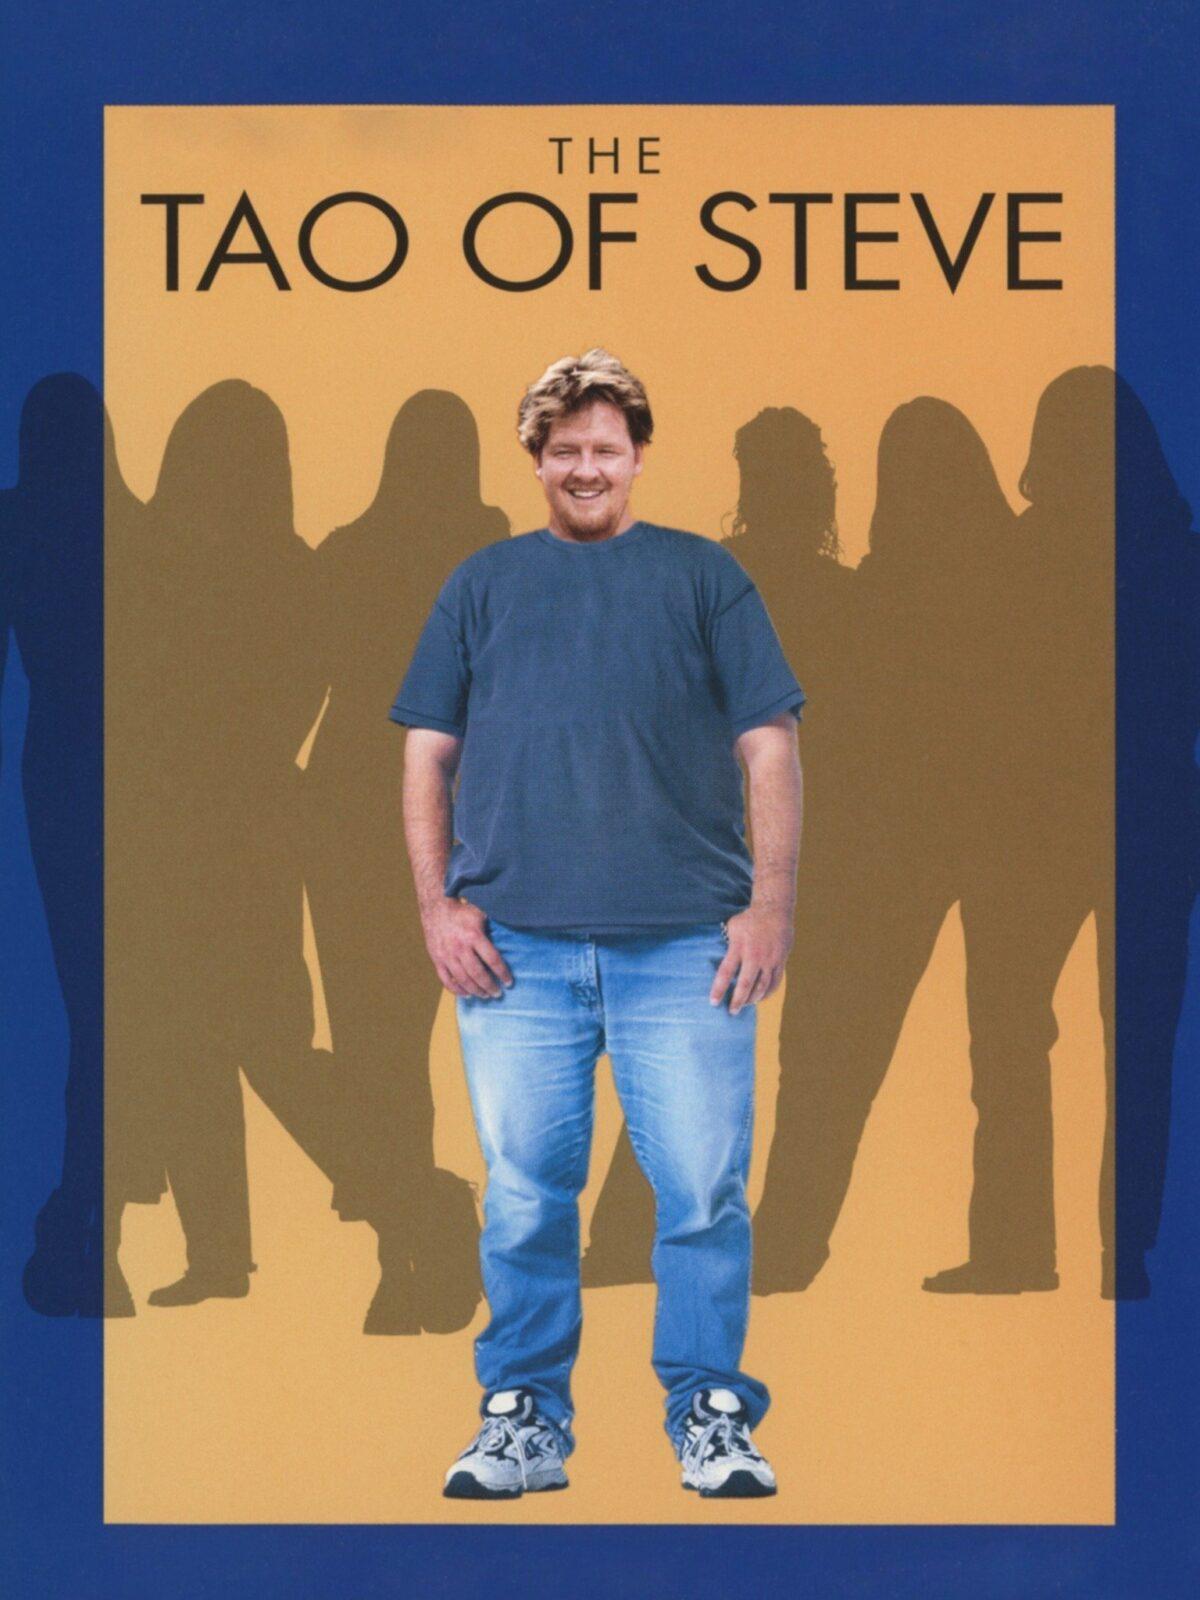 Movie poster for "The Tao of Steve," starring Donal Logue. (Thunderhead Productions)